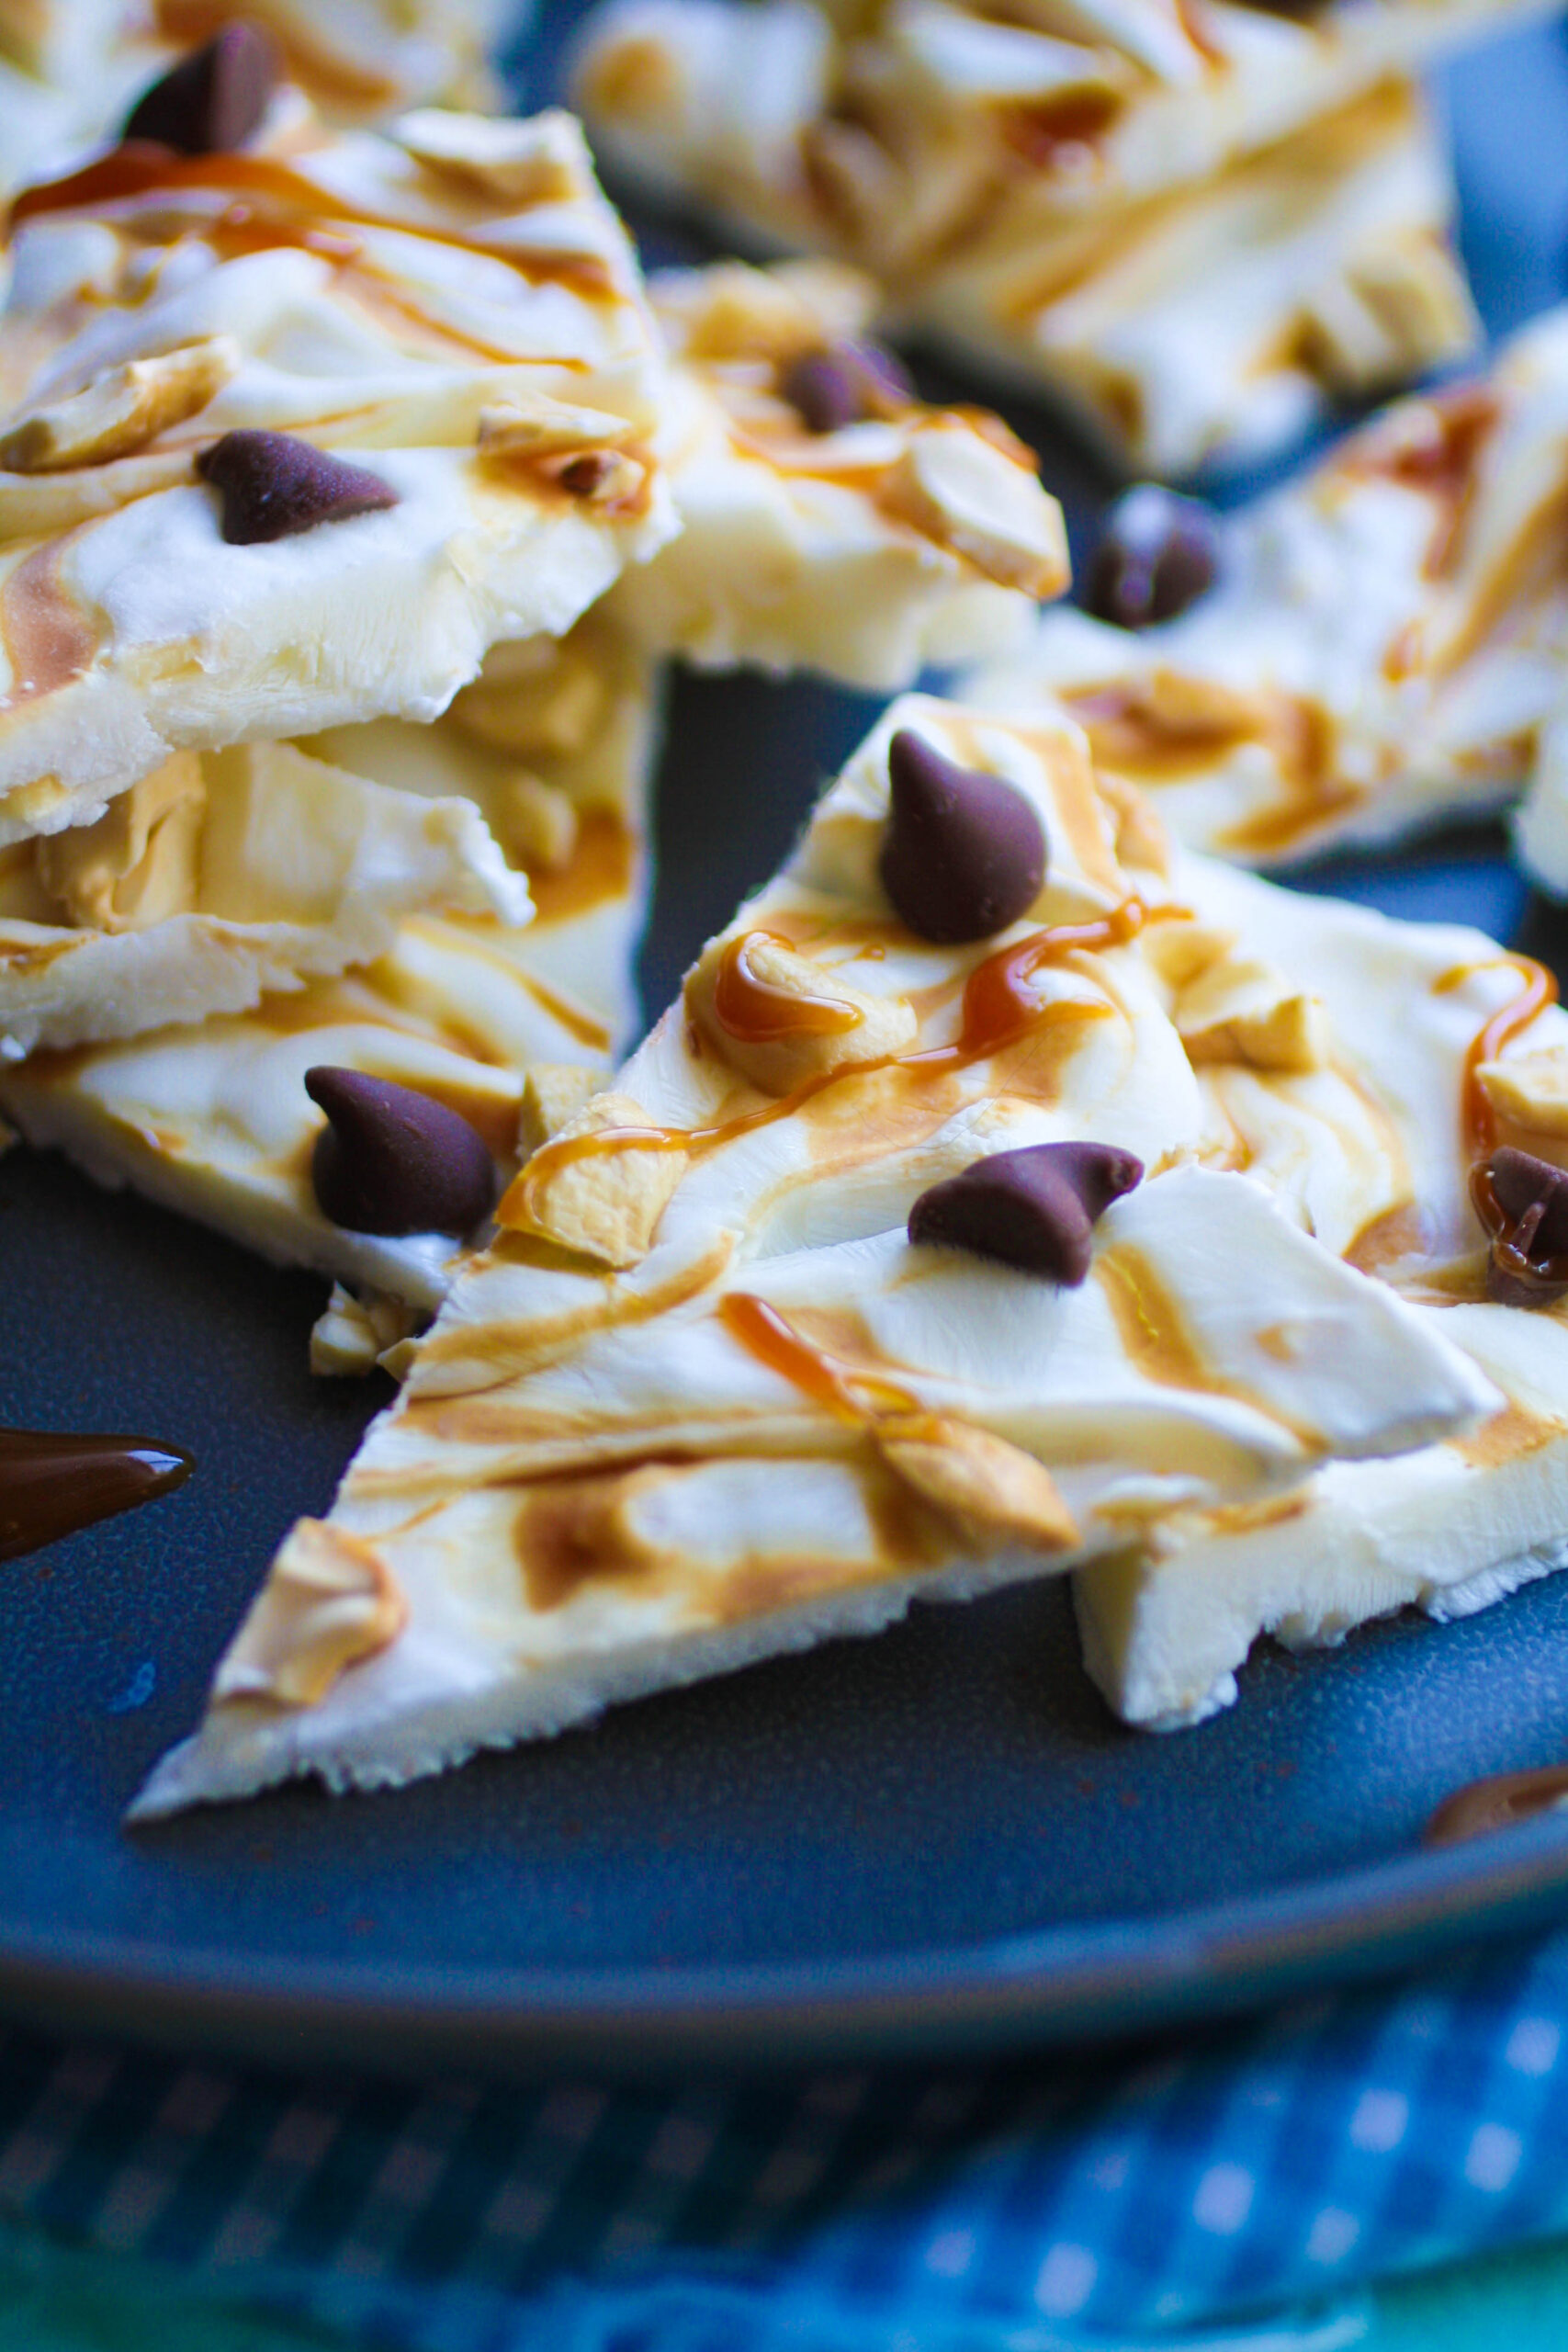 Frozen Yogurt Bark with Caramel, Cashews and Chocolate is a simple dessert that you'll make over and over!